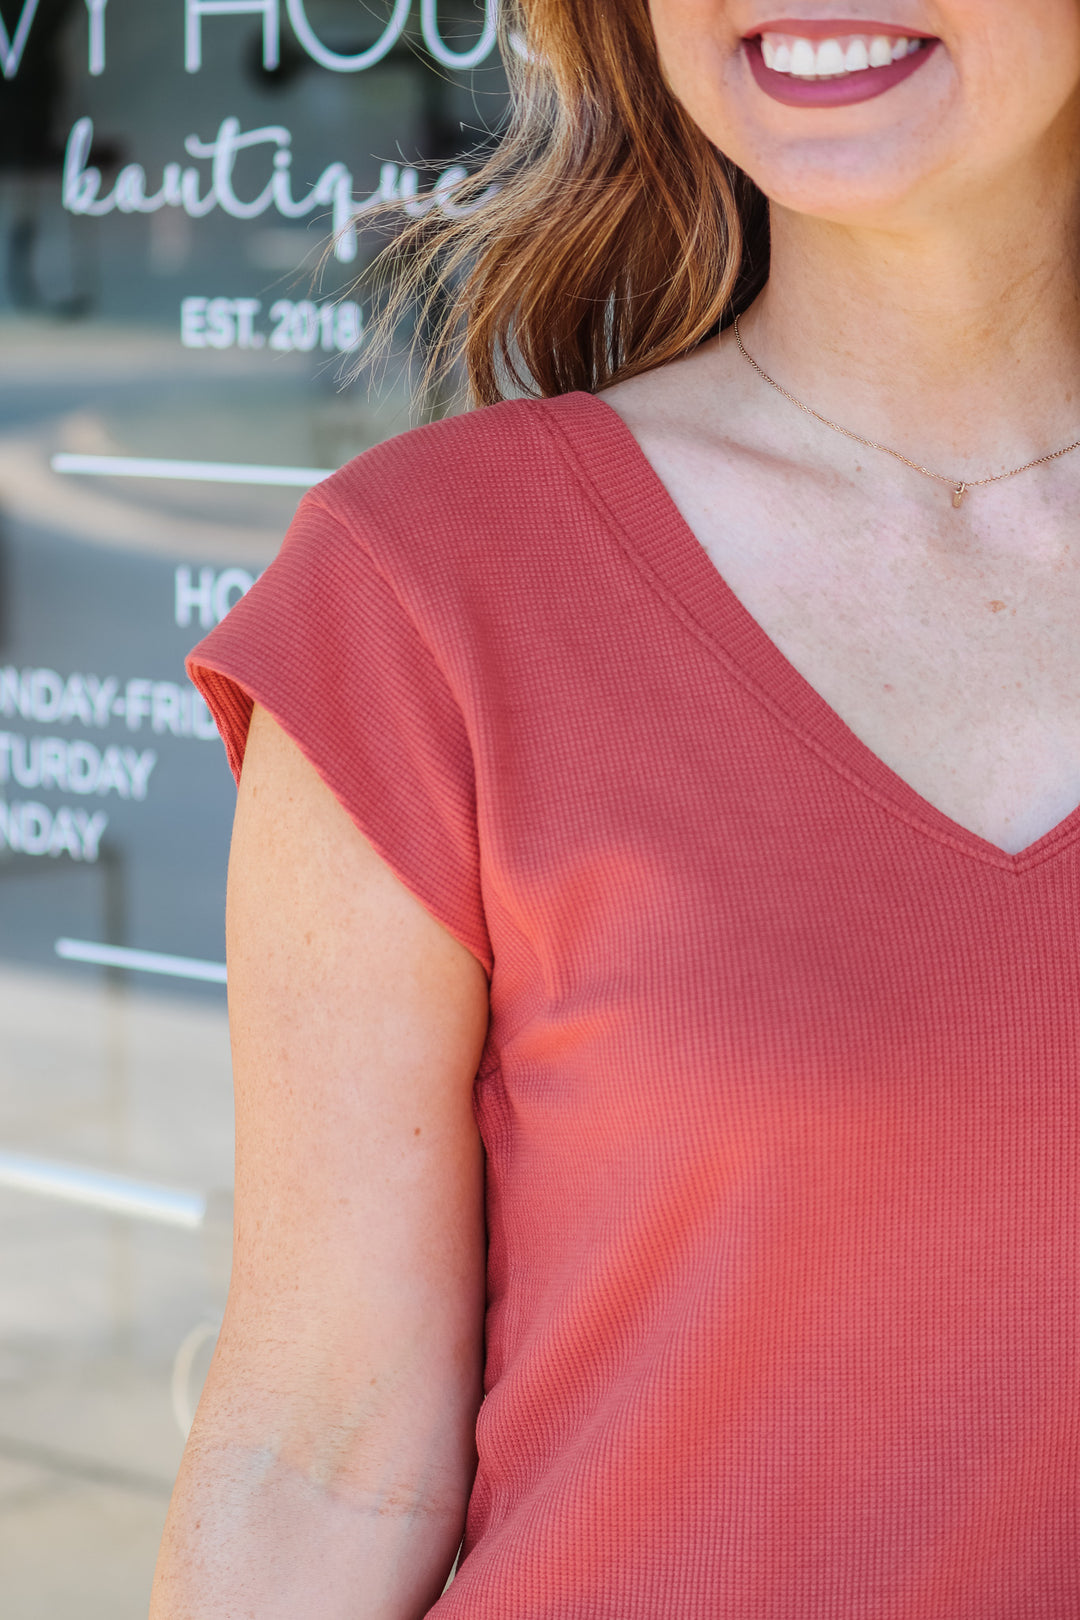 A close up of a woman's shoulder wearing a red clay colored top.